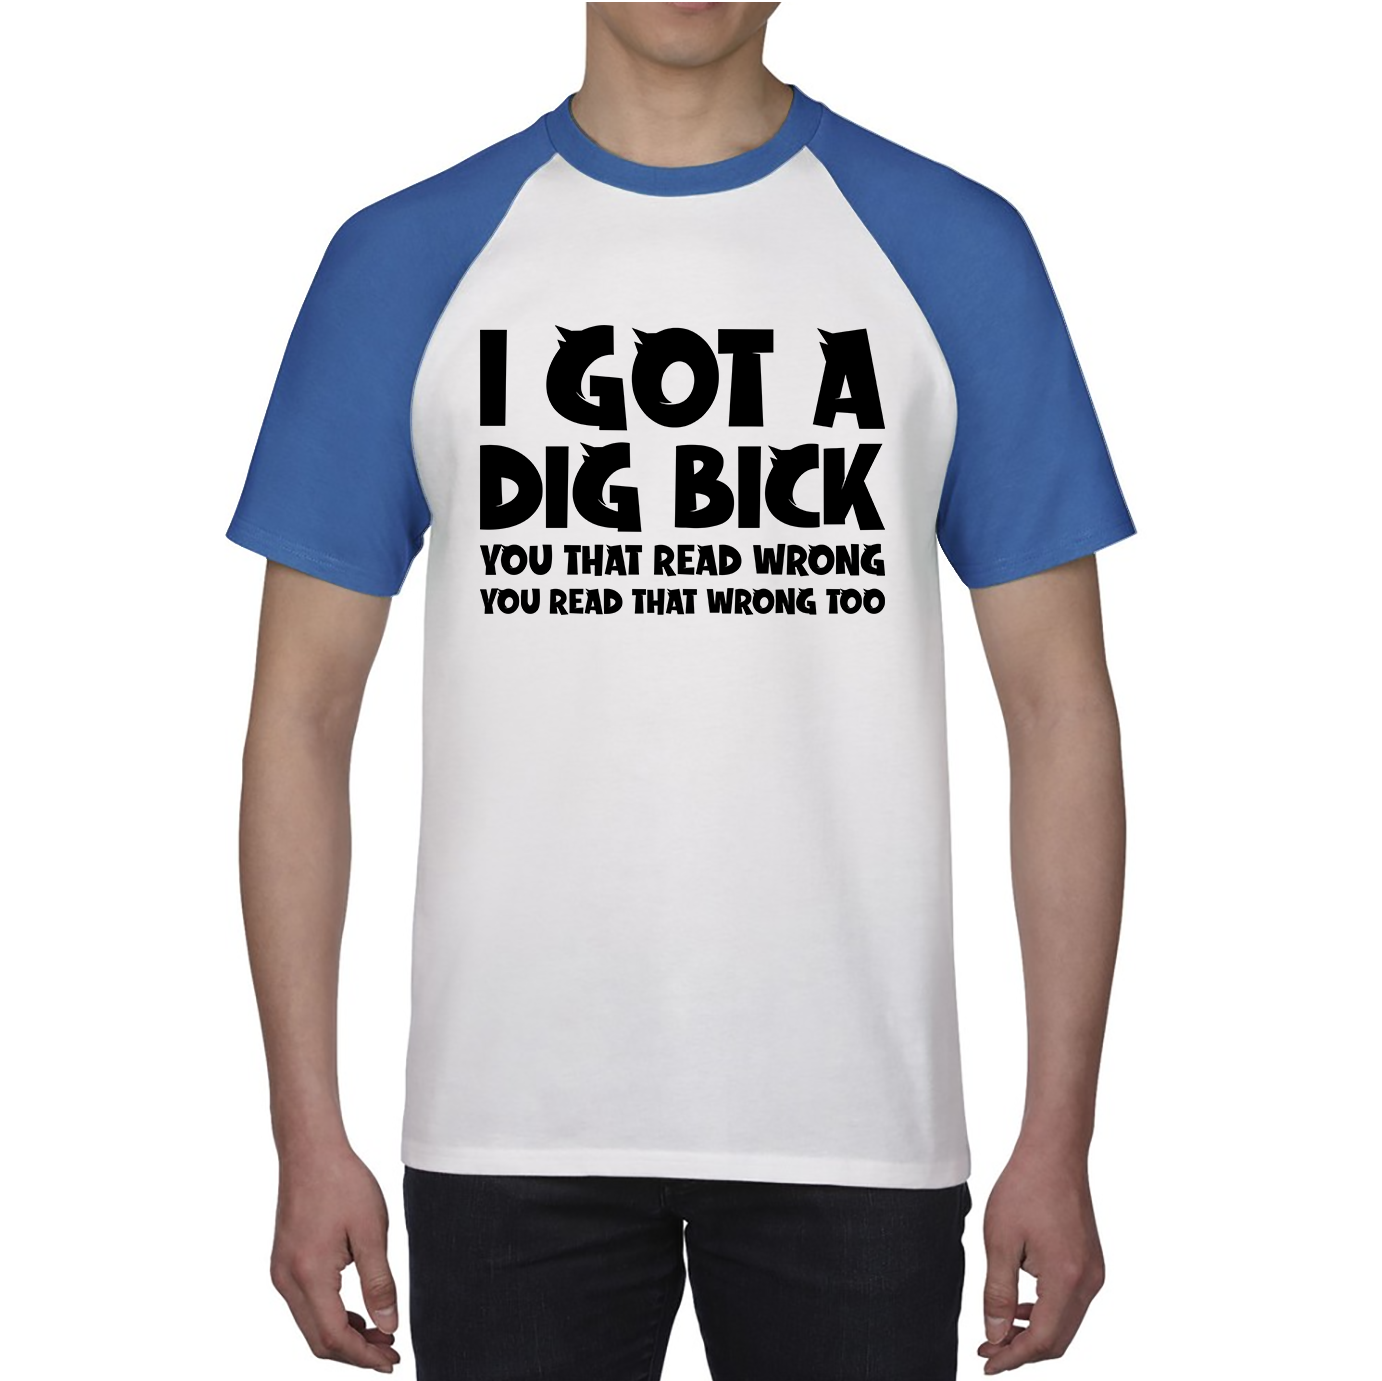 I Got A Dig Bick You That Read Wrong You Read That Wrong Too Funny Novelty Sarcastic Humour Baseball T Shirt